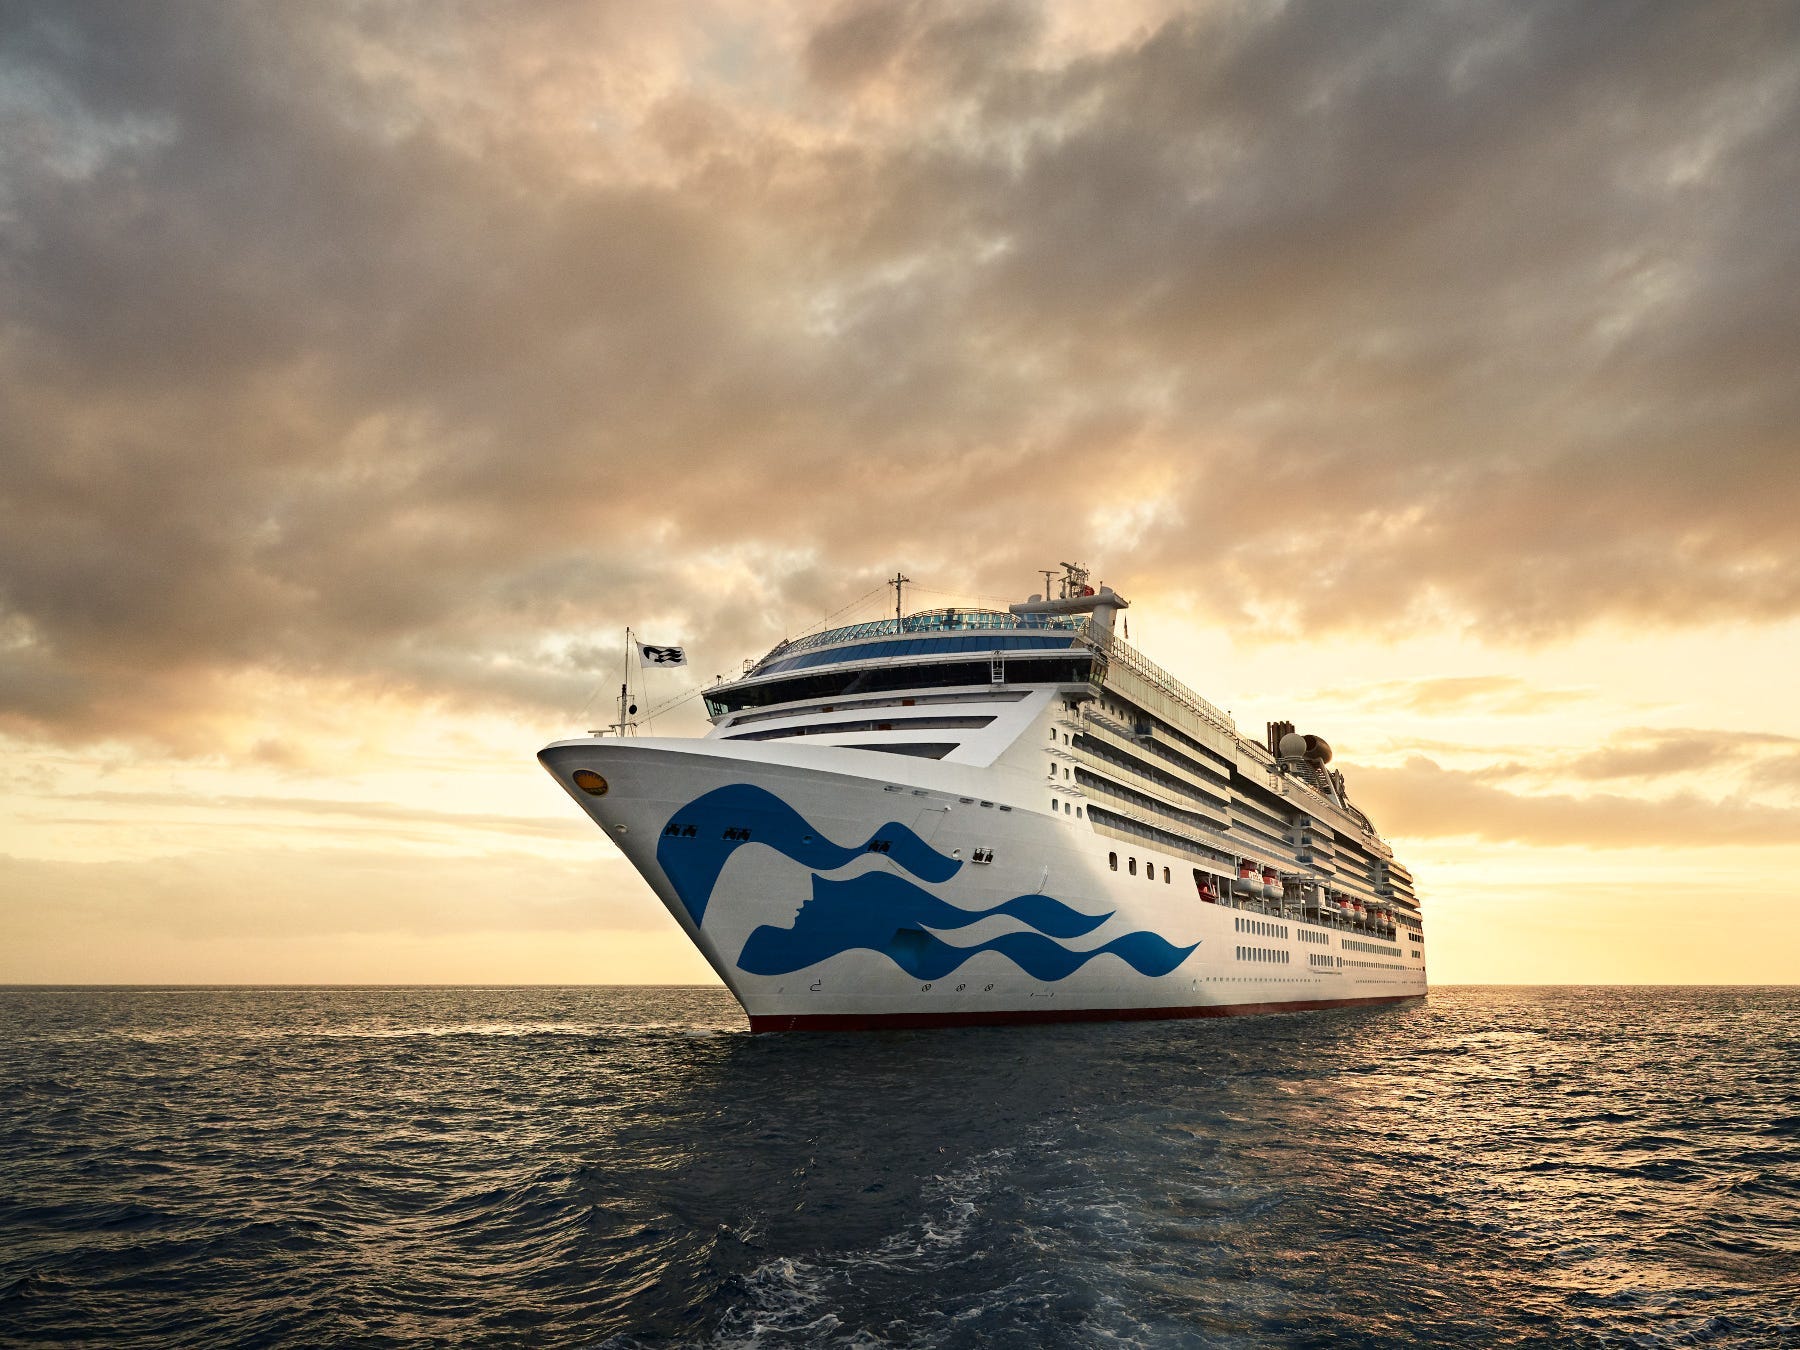 <ul class="summary-list"><li>Princess Cruises announced a 114-day <a href="https://www.businessinsider.com/world-cruise-sold-out-photos-a-73500-per-person-2021-7">world cruise</a> to 52 destinations in 2026, starting at $20,000 per person. </li><li>Guests who book early would get a free, all-inclusive package, a first for Princess' global itineraries.</li><li>Extended and all-inclusive cruises have emerged as big trends in the vacation industry.</li></ul><p>Princess Cruise's new <a href="https://www.businessinsider.com/regent-seven-seas-ultra-luxury-world-cruise-40-countries-2027-2024-3">around-the-world voyage</a> will hit two vacation trends in one itinerary.</p><p>In January 2026, the company says its Coral Princess will embark on a 114-day cruise to 52 ports in 28 countries and six continents — more destinations than any of its previous <a href="https://www.businessinsider.com/around-the-world-monthslong-cruises-princess-oceania-royal-ultimate-cunard-2024-1">global sailings</a>.</p><p>It's the Carnival Corp brand's latest appeal to the <a href="https://www.businessinsider.com/royal-caribbean-ultimate-world-9-month-cruise-logistics-planning-ceo-2024-1">extended cruising trend</a>. But it's not the only fad this four-month vacation is targeting.</p><p>The sailing, which starts at $20,000 per person, also marks the first time Princess is offering a complimentary all-inclusive package as a way to entice early bookings.</p><div class="read-original">Read the original article on <a href="https://www.businessinsider.com/princess-cruises-all-inclusive-world-cruise-4-months-2024-5">Business Insider</a></div>